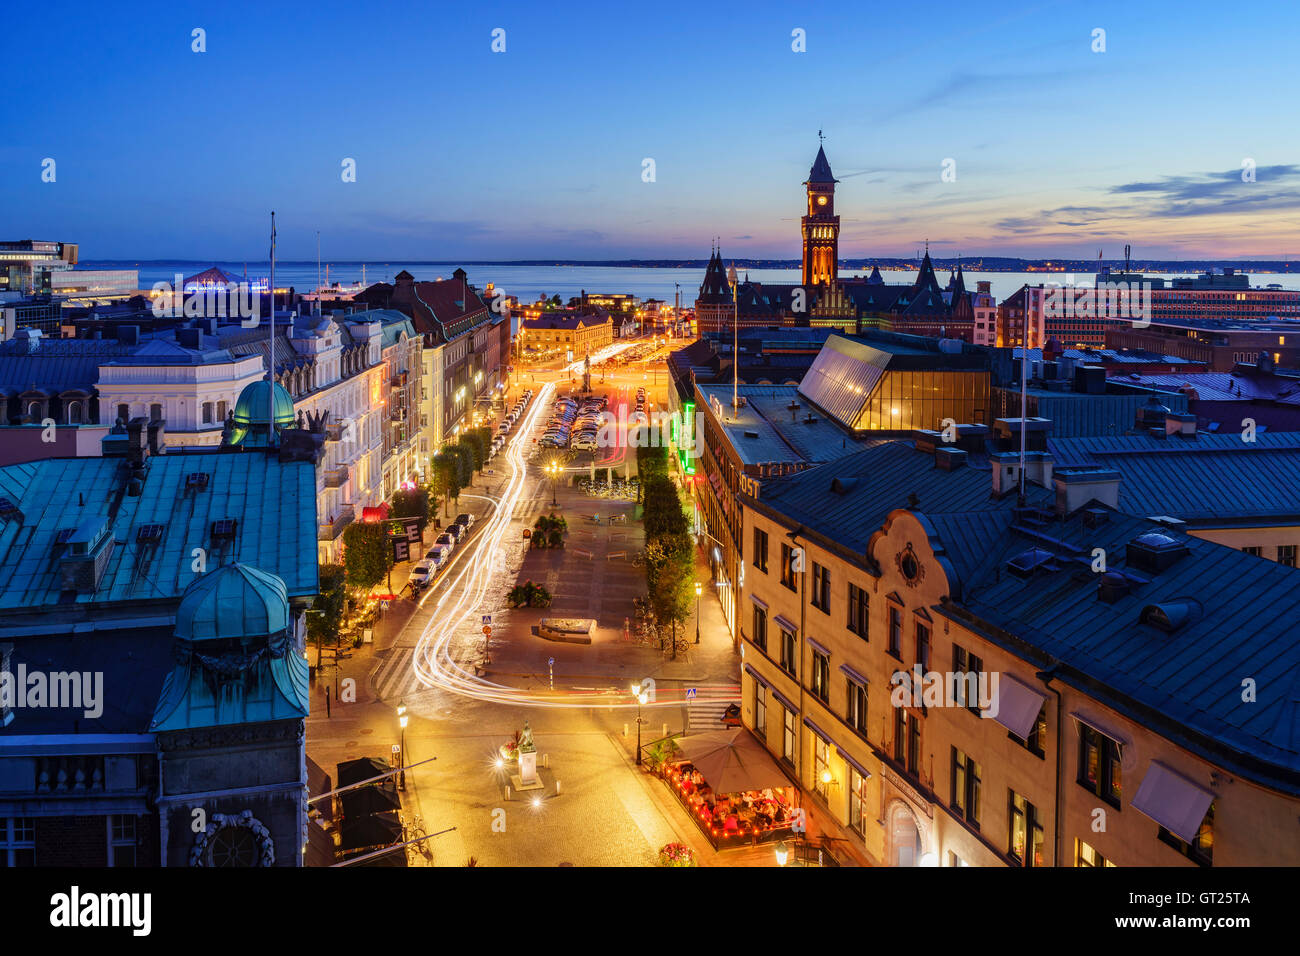 Aerial view of the beautiful city - Helsingborg, Sweden at night Stock Photo